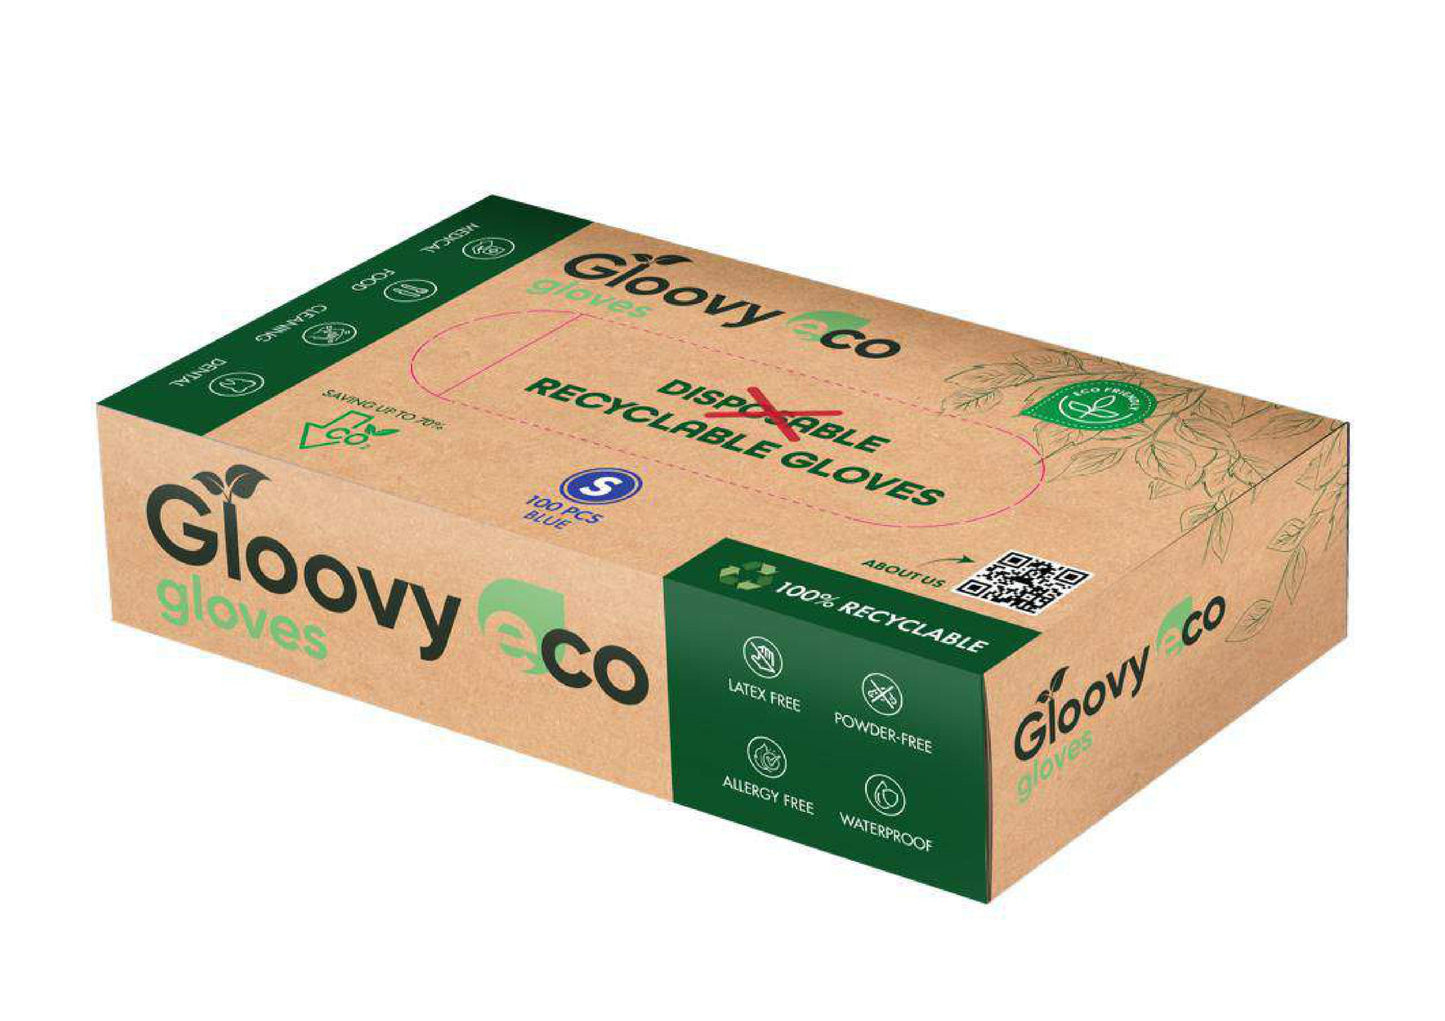 Gloovy - Eco Gloves - black gloves - discount package 20/outer box